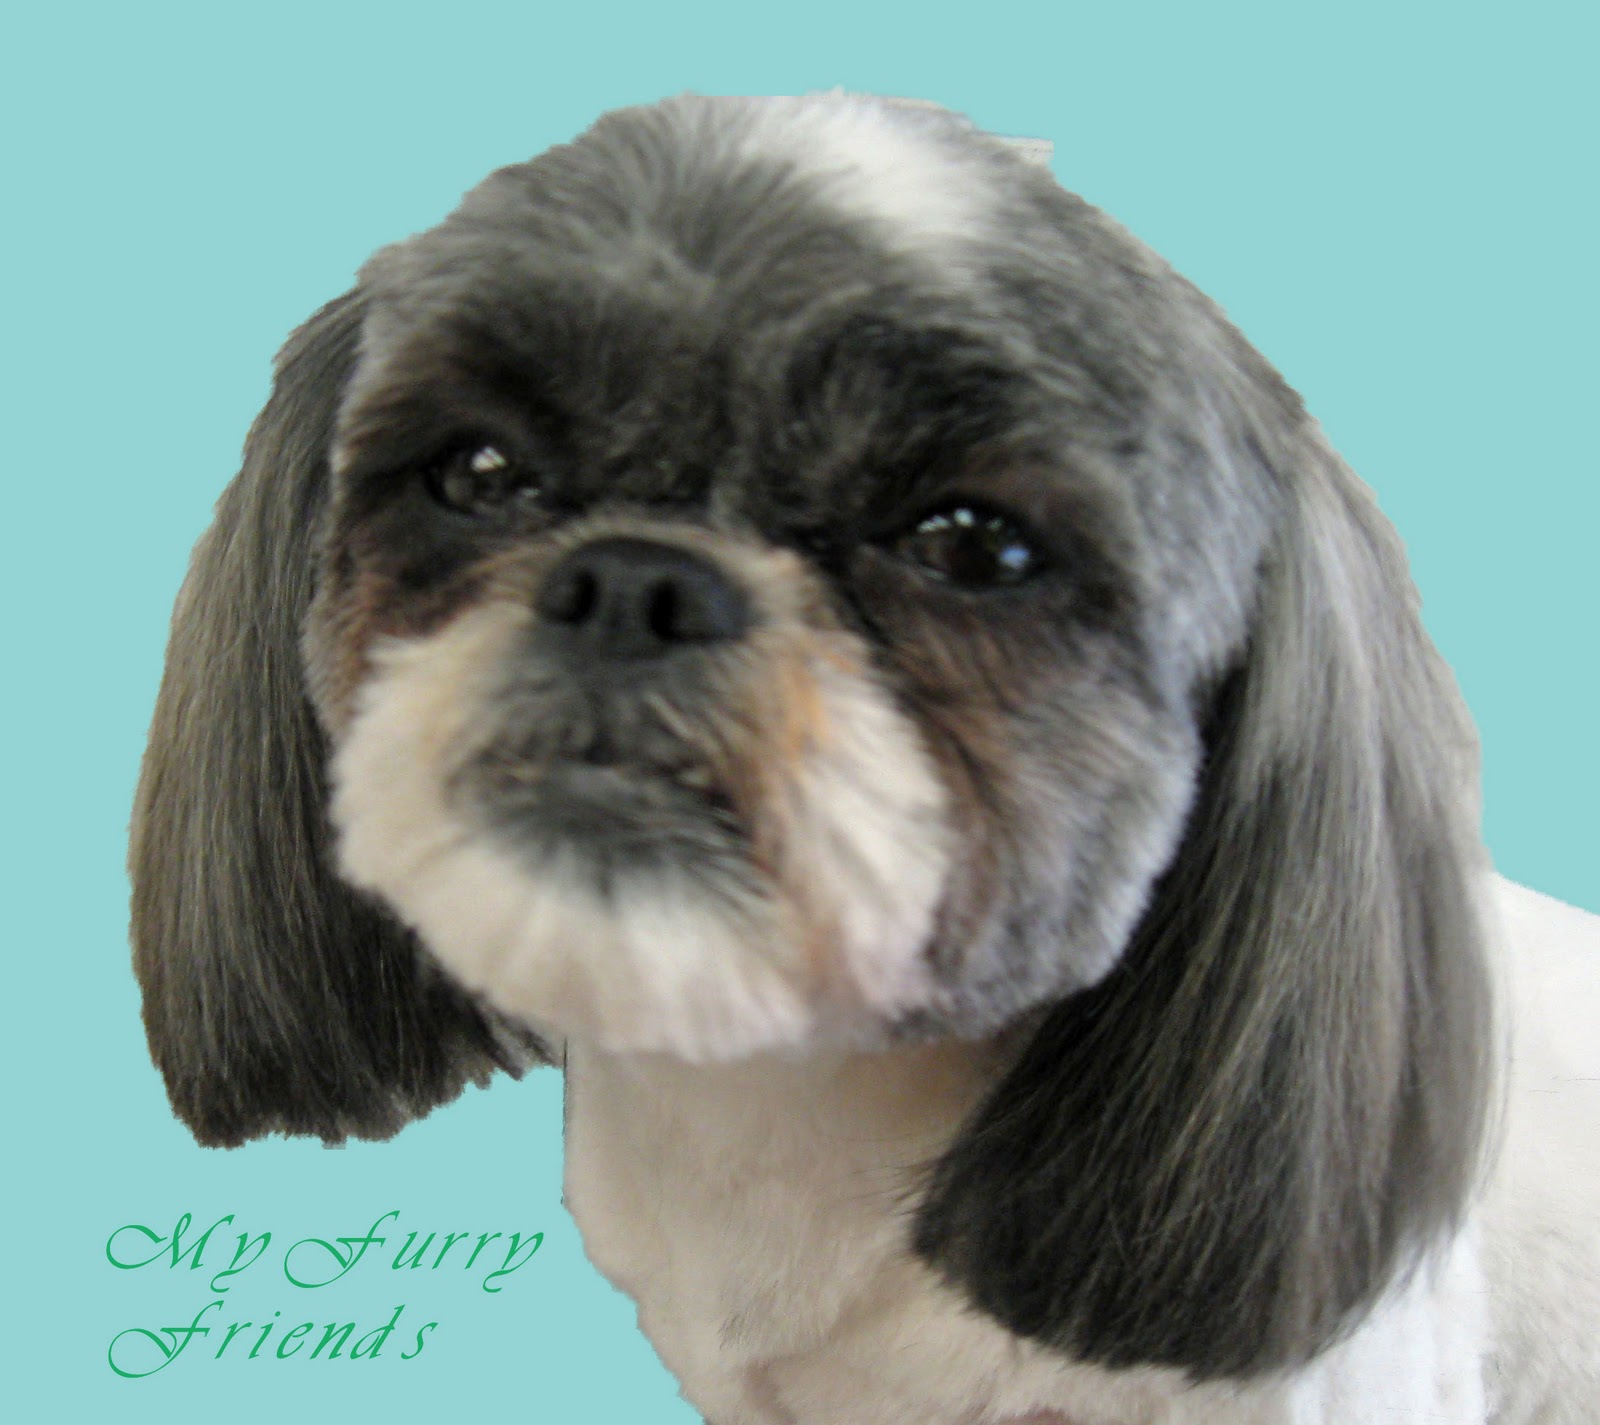 Pet Grooming The Good, The Bad, & The Furry ShihTzu Faces